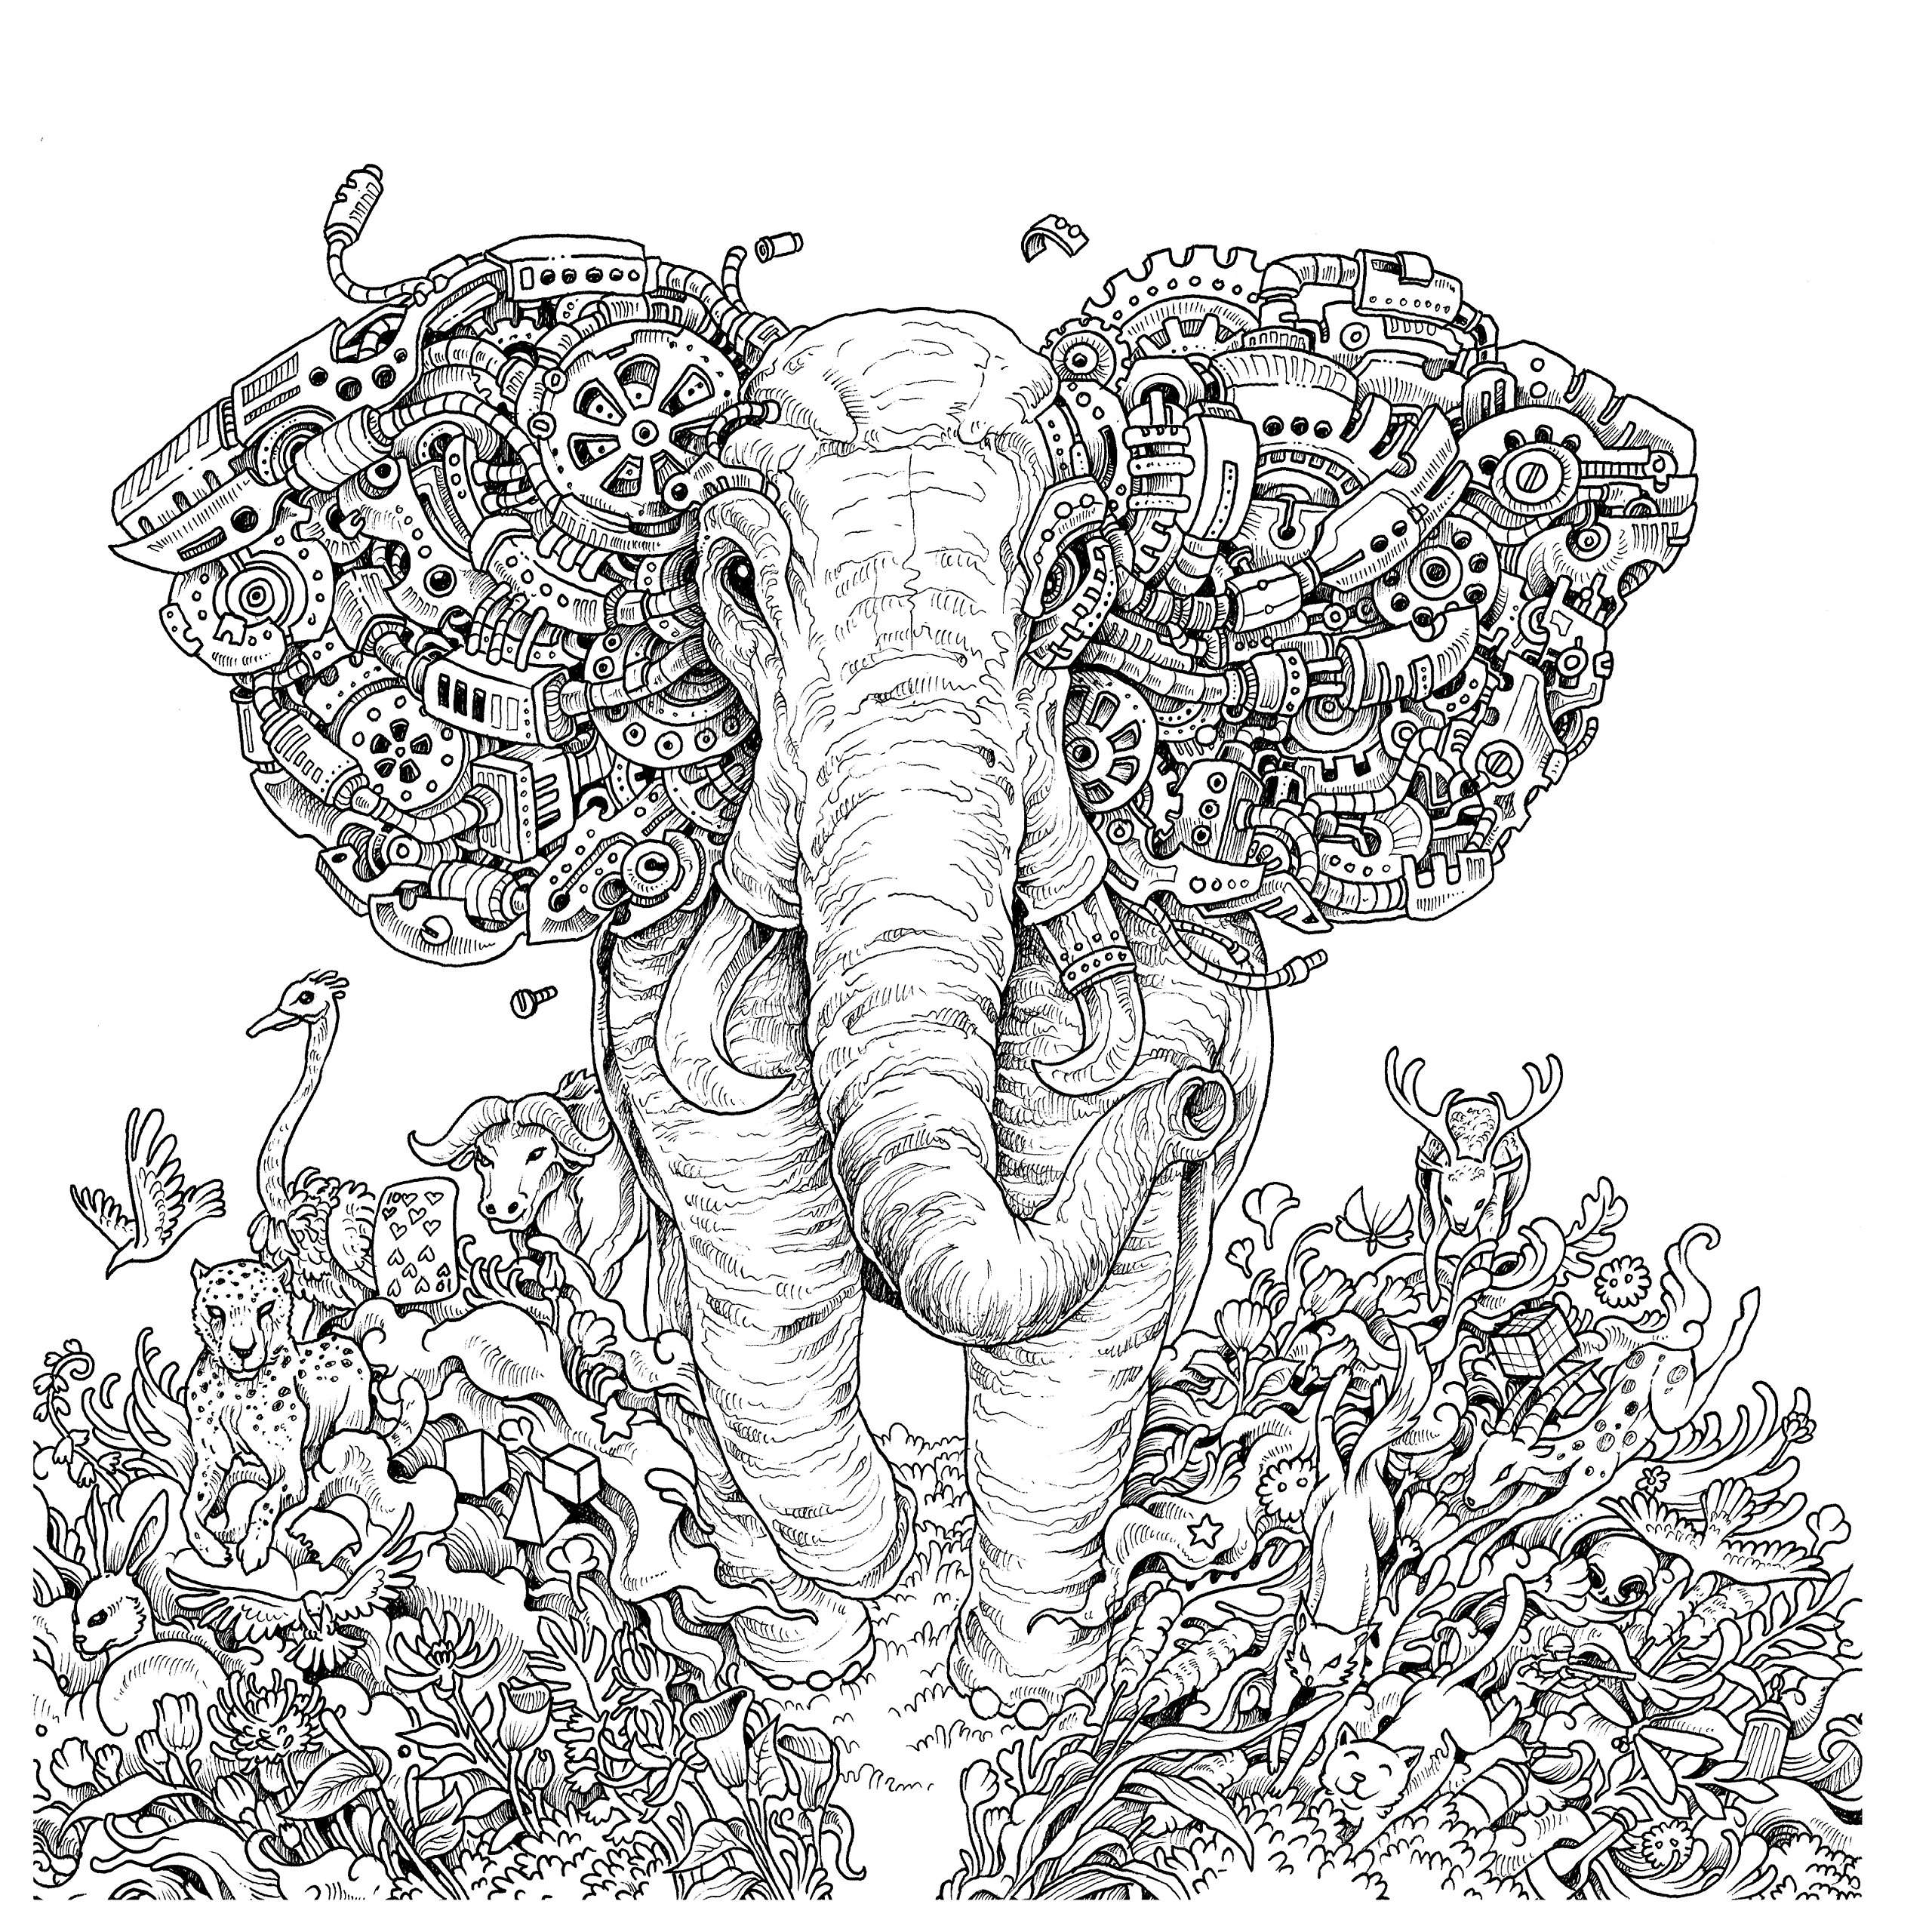 Elephant Adult Coloring Page